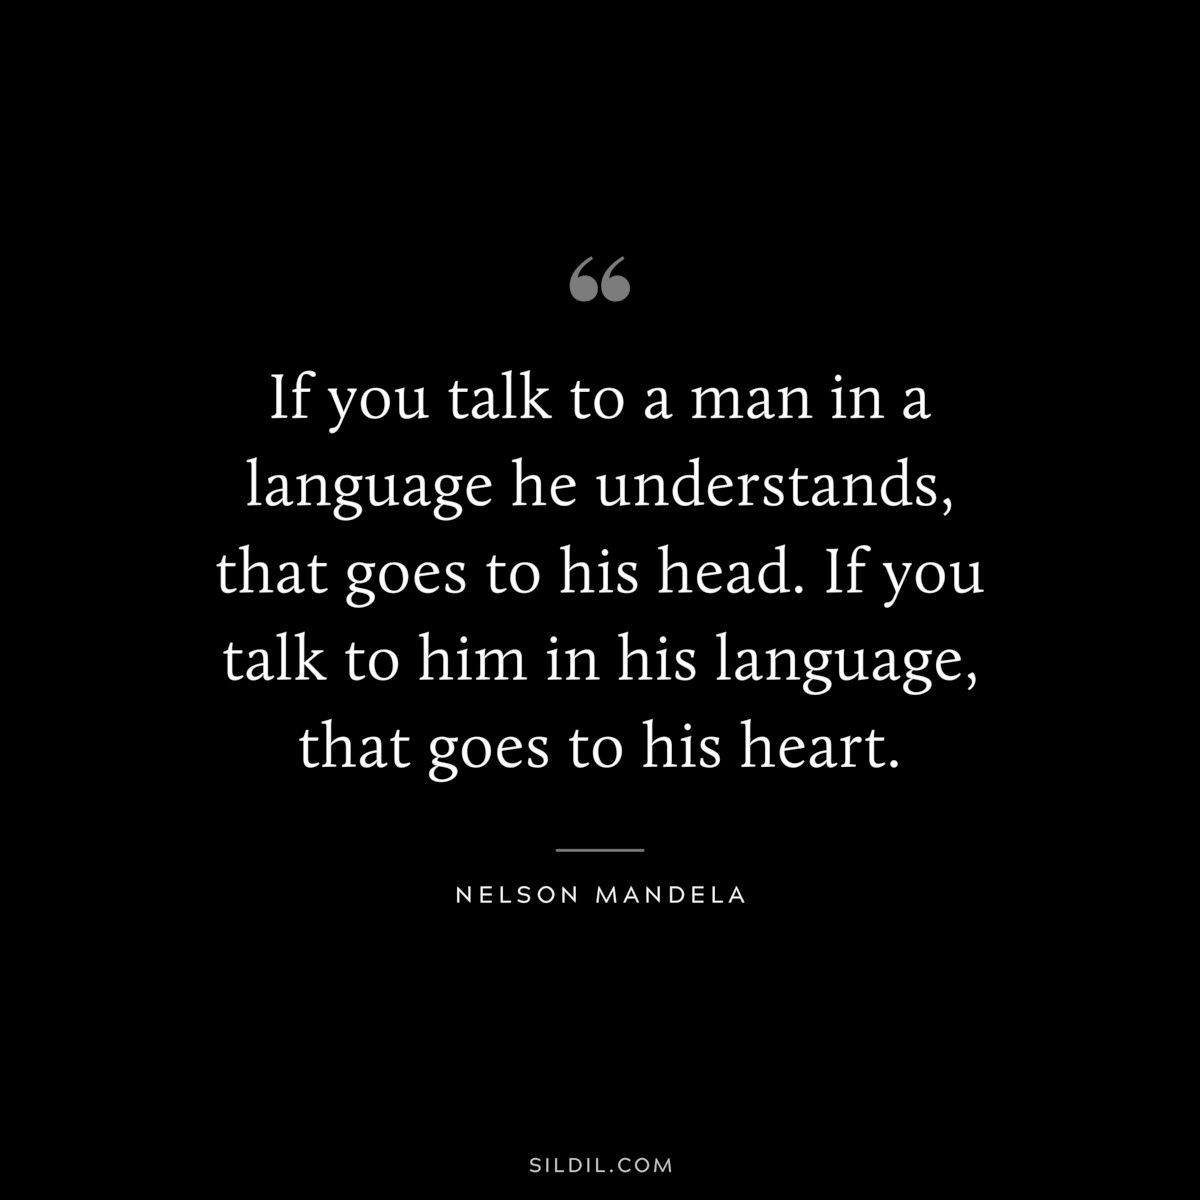 If you talk to a man in a language he understands, that goes to his head. If you talk to him in his language, that goes to his heart. ― Nelson Mandela